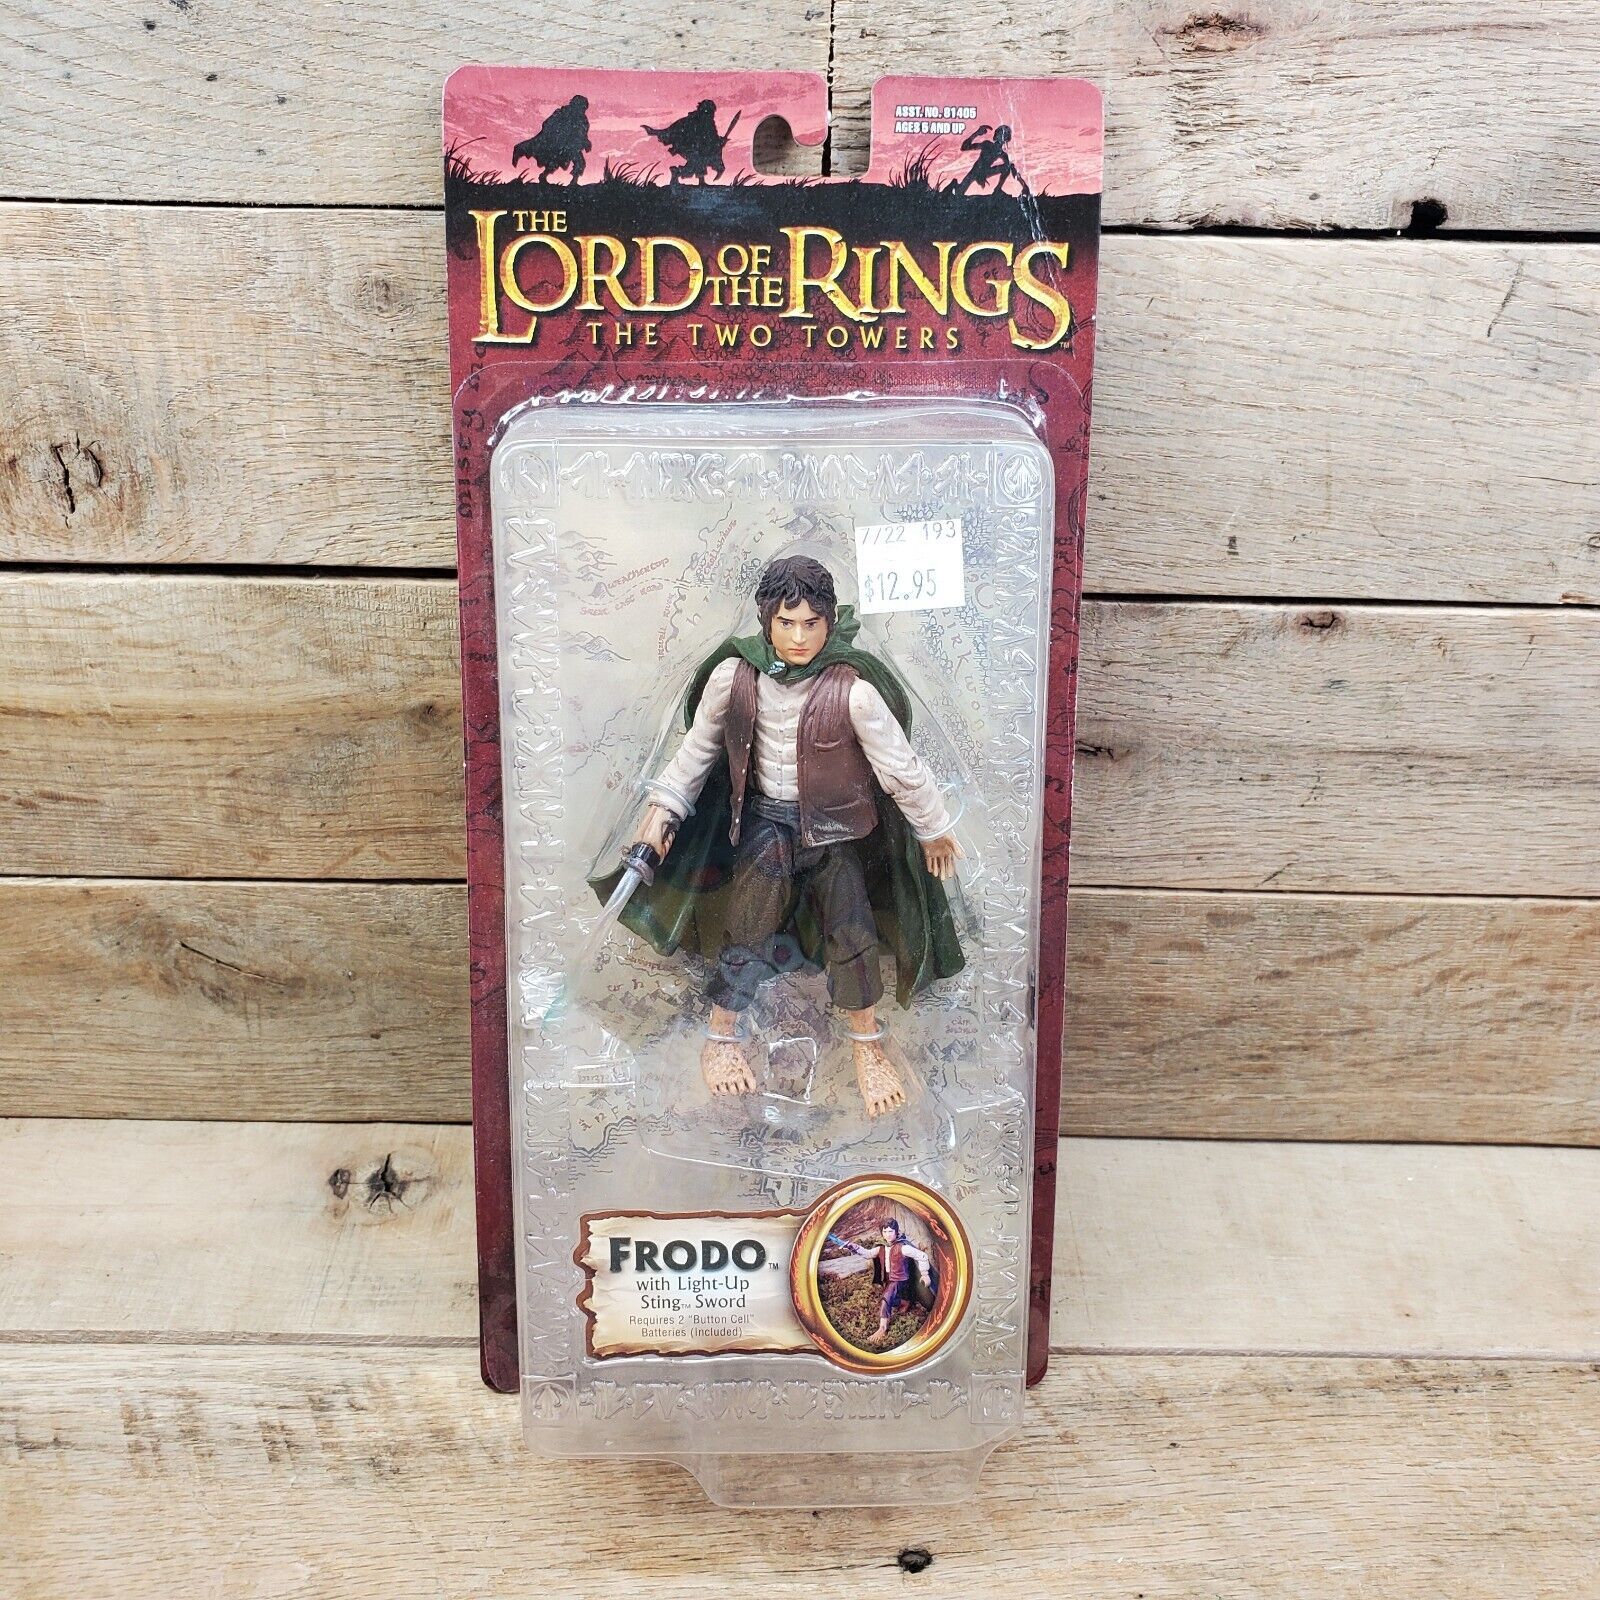 Primary image for Frodo Lord of the Rings Toy Biz Two Towers Figure 2003 LOTR Light Up Sting Sword